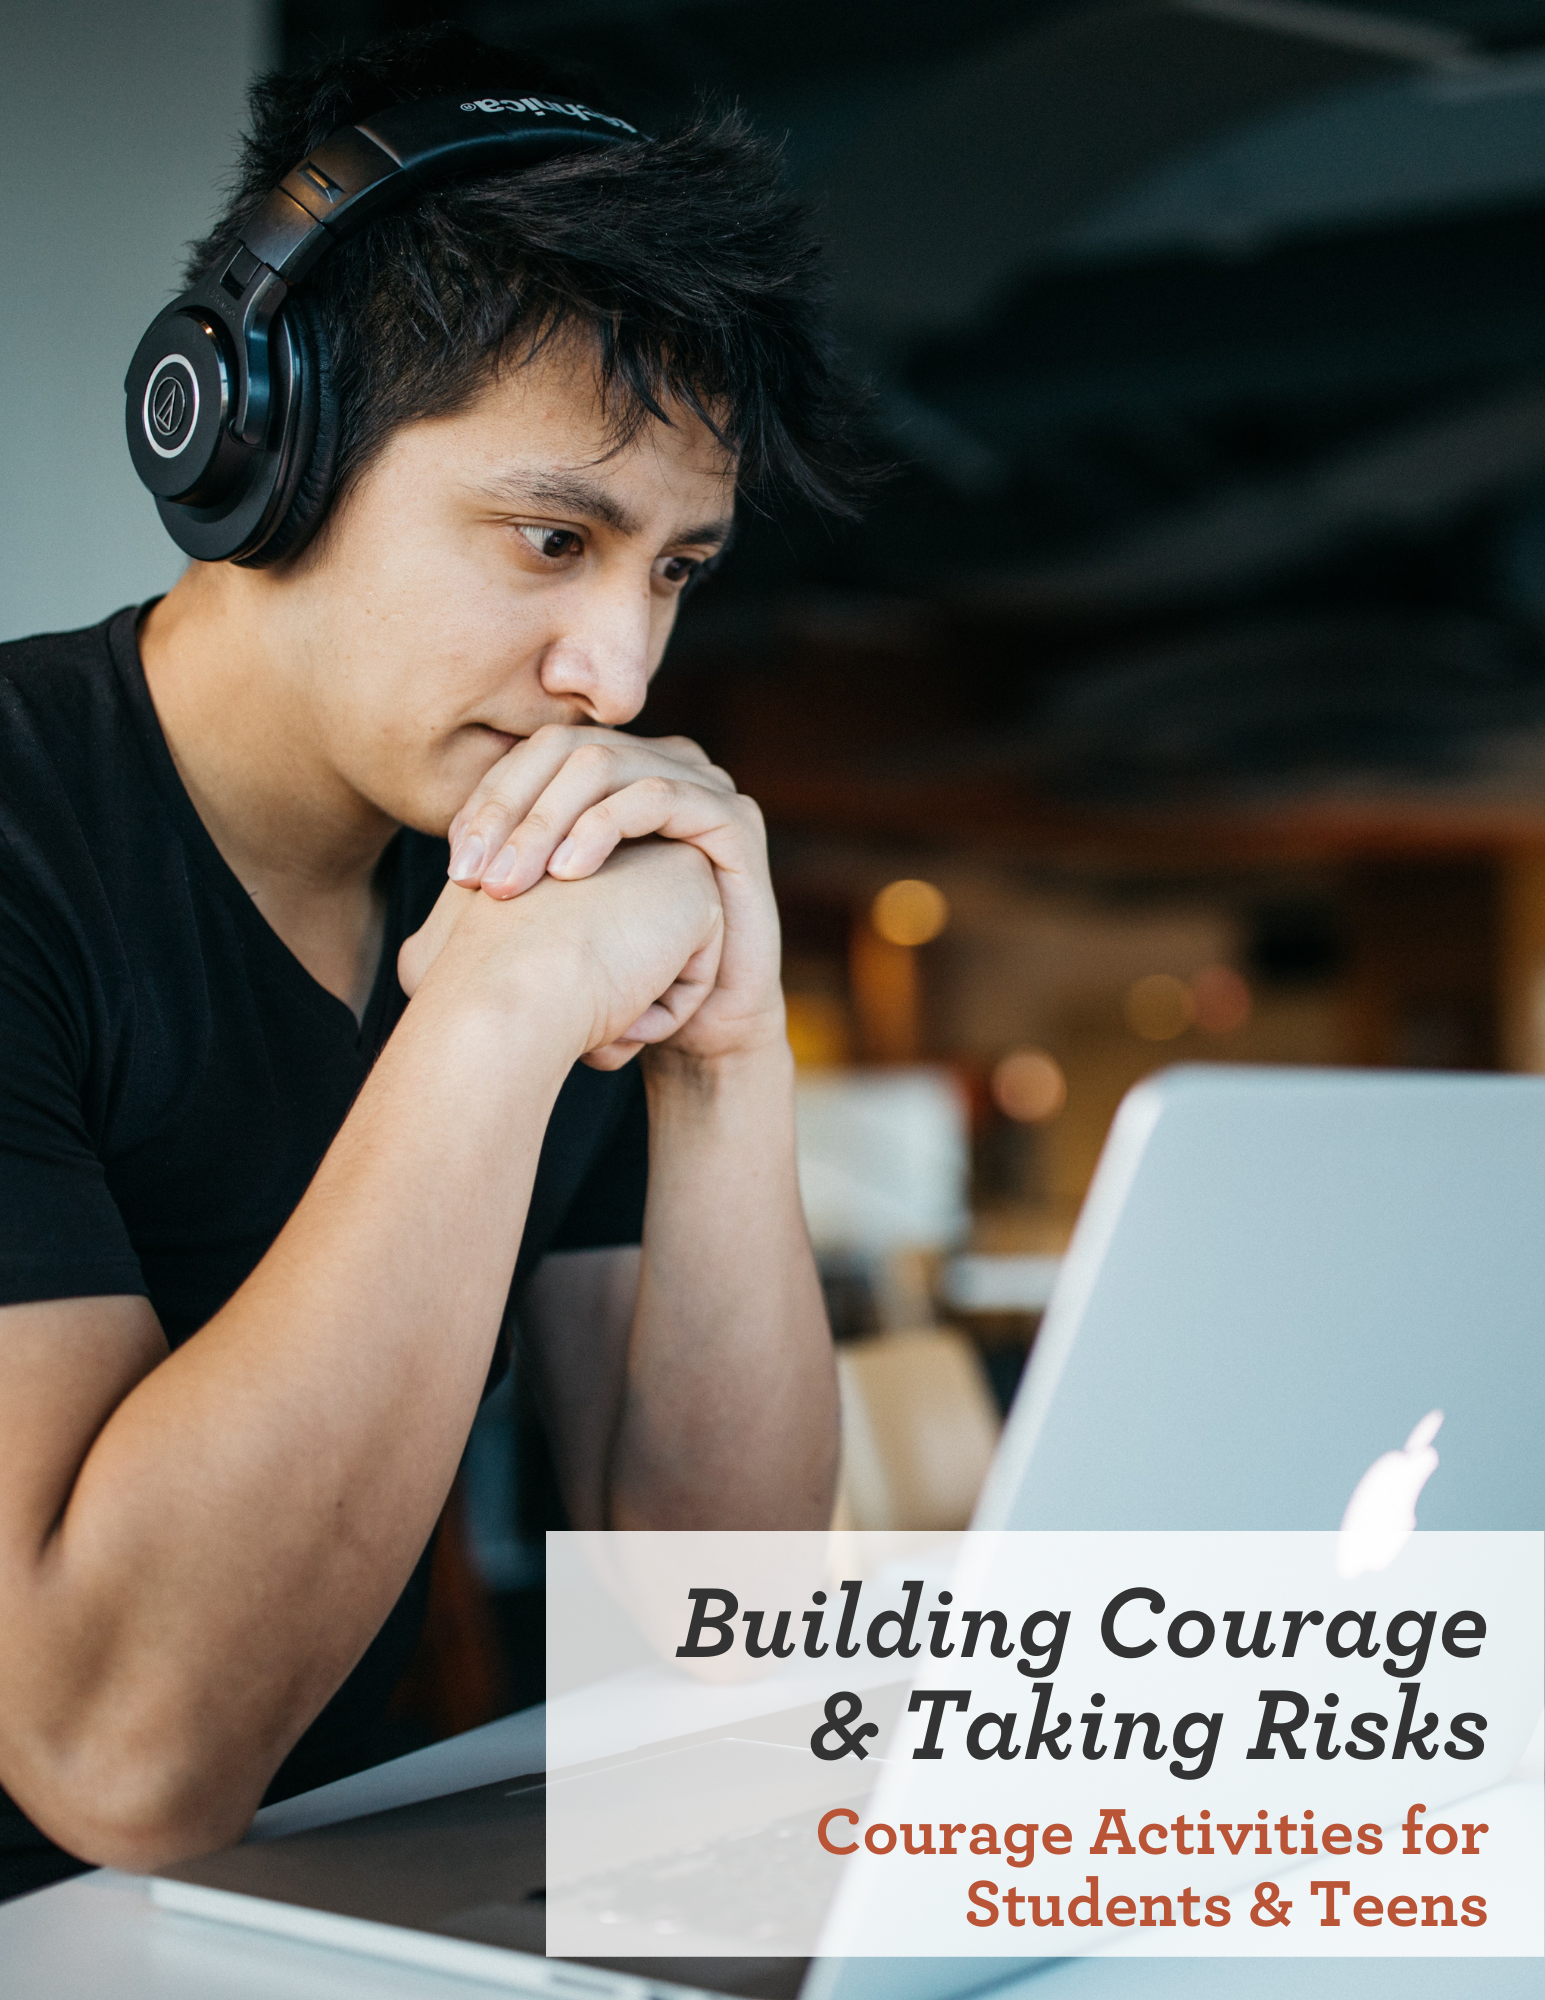 Building Courage & Taking Risks